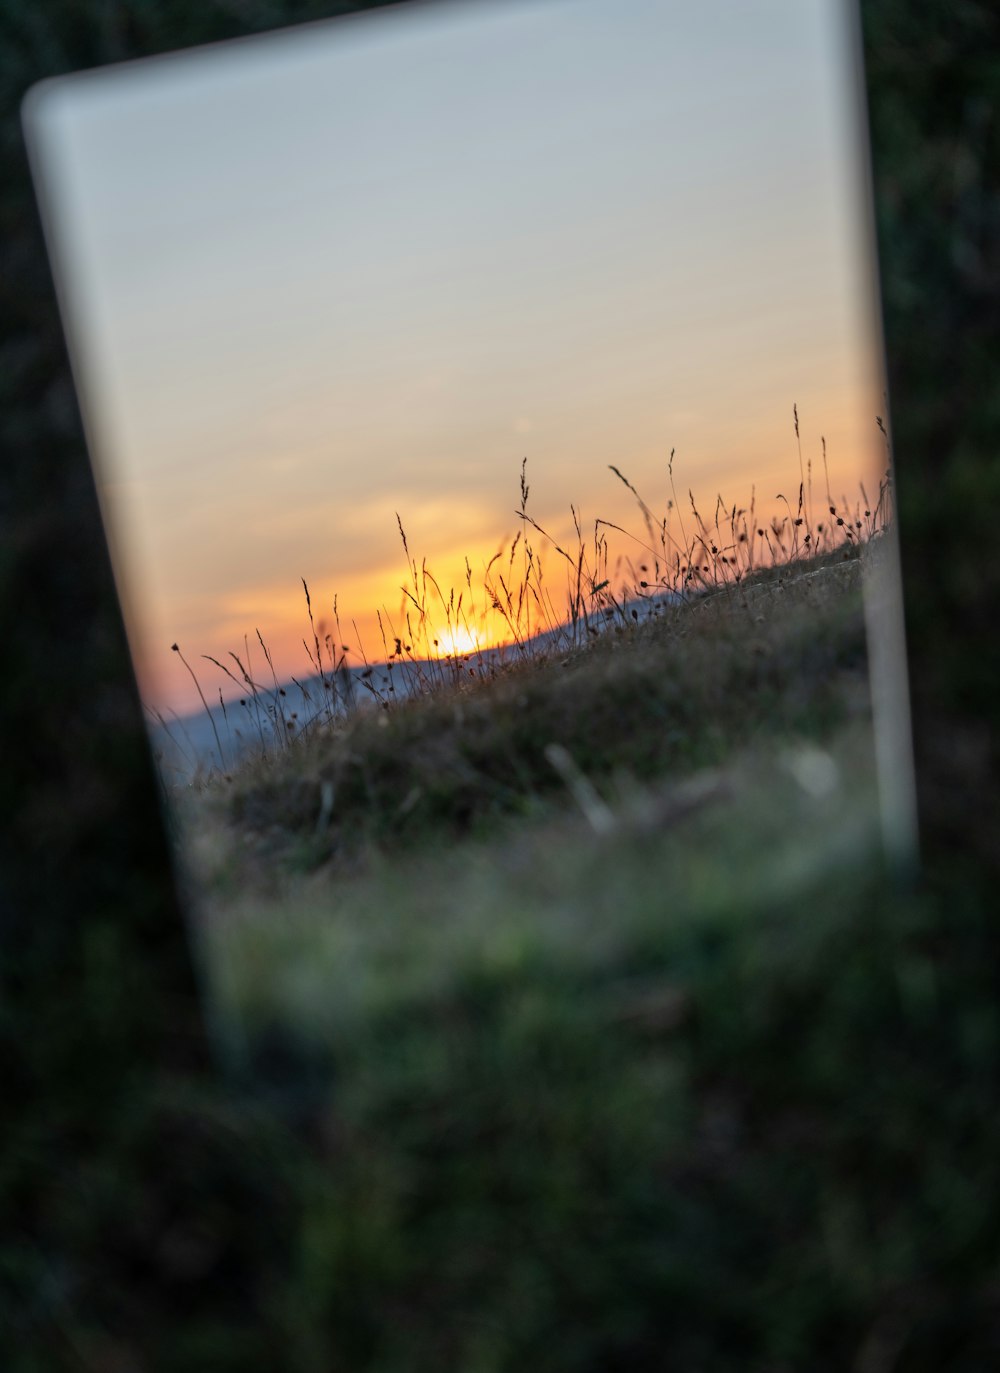 a mirror reflecting a sunset in a grassy field